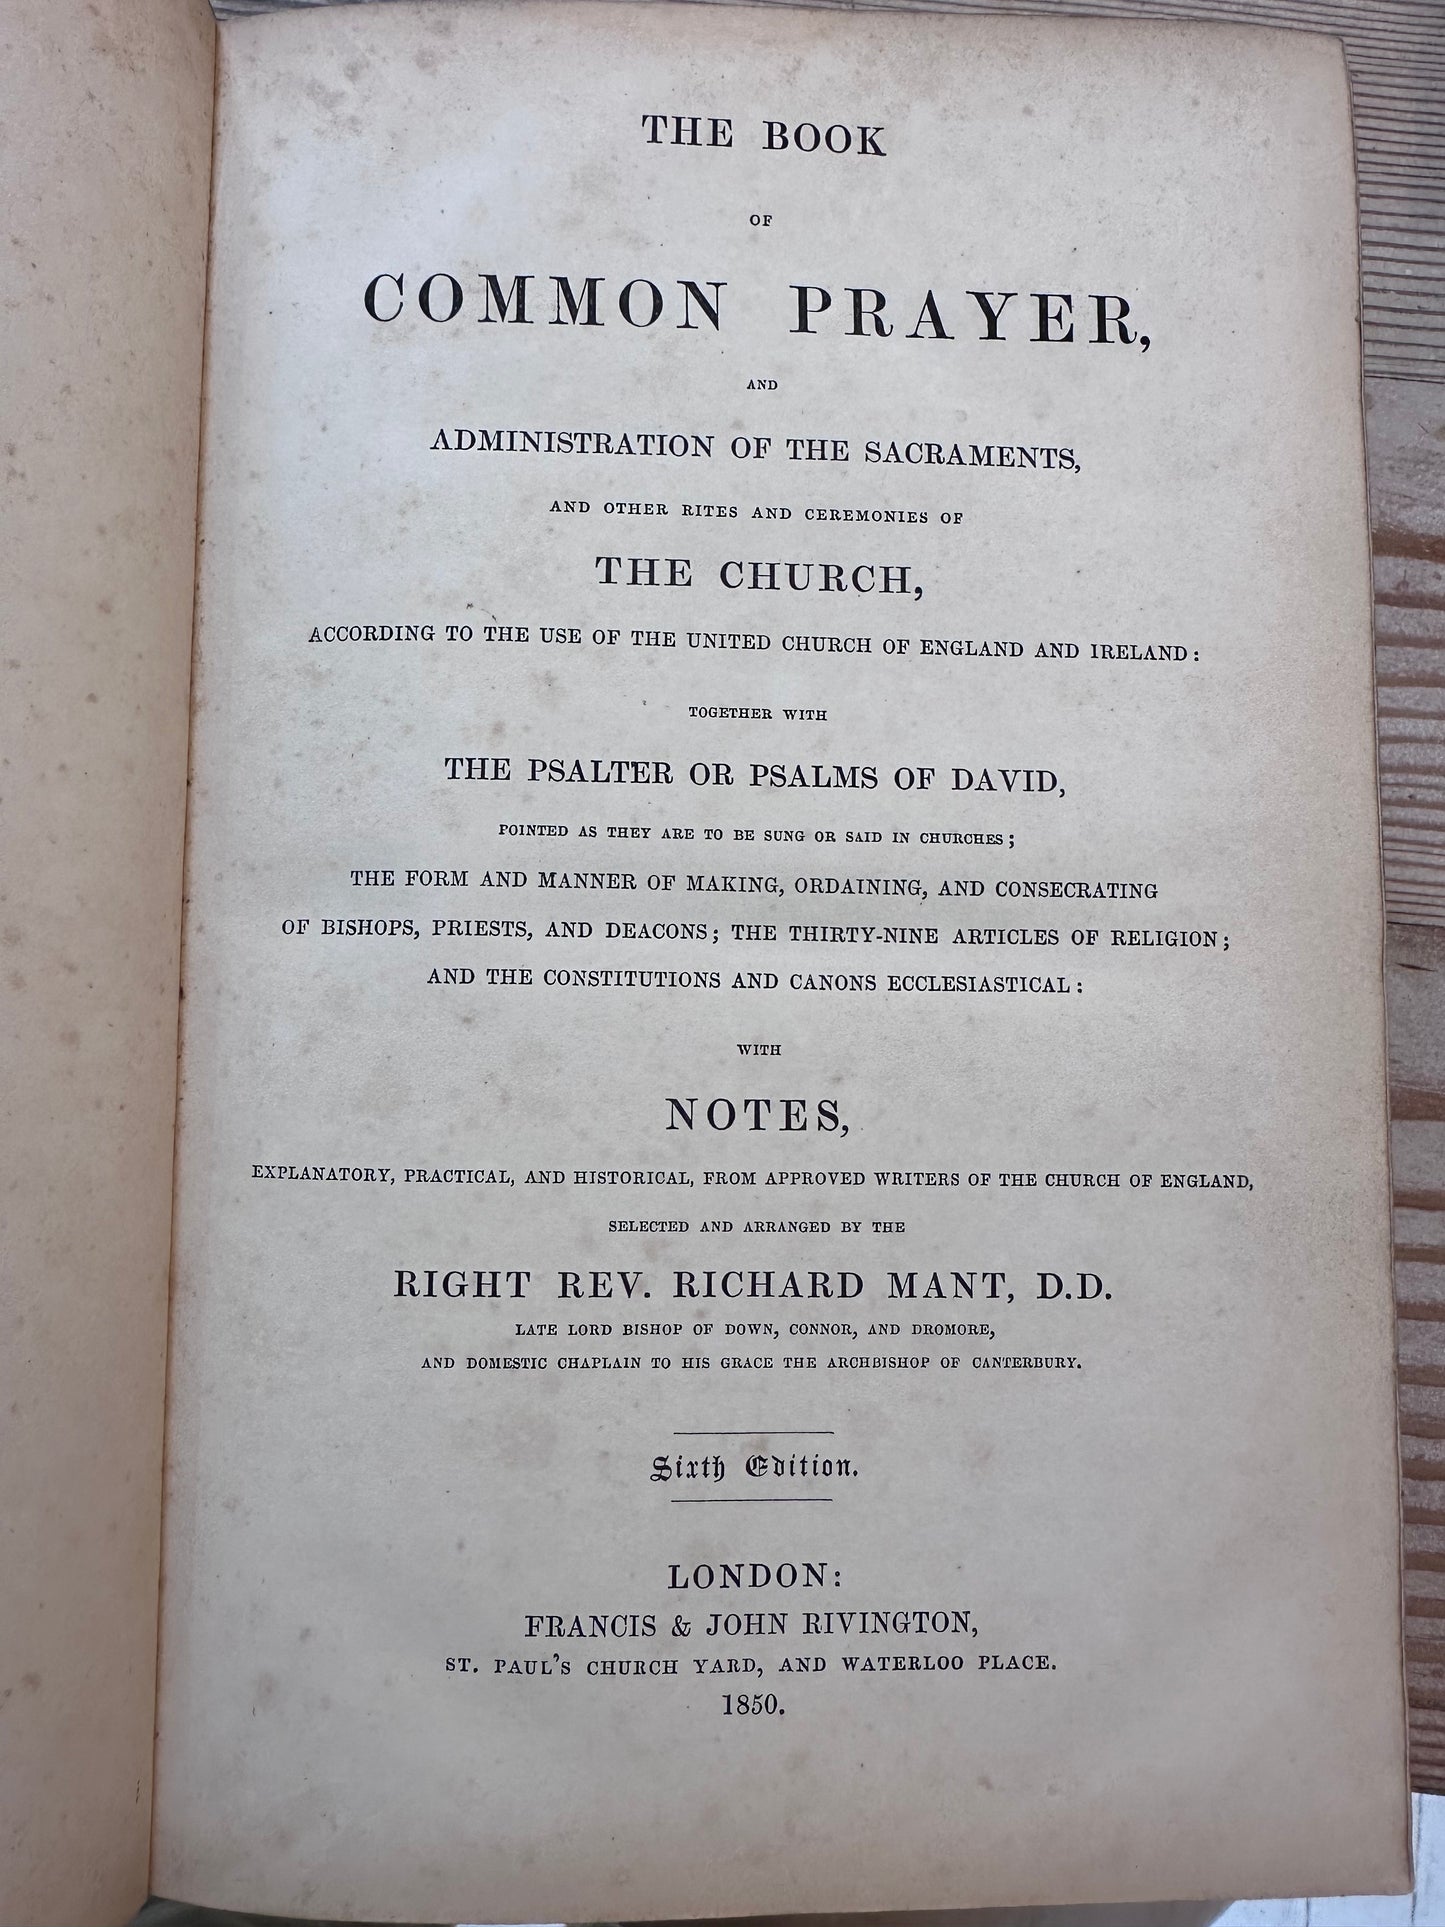 Antique Bible 1850 And the Book of Common Prayer sold as set